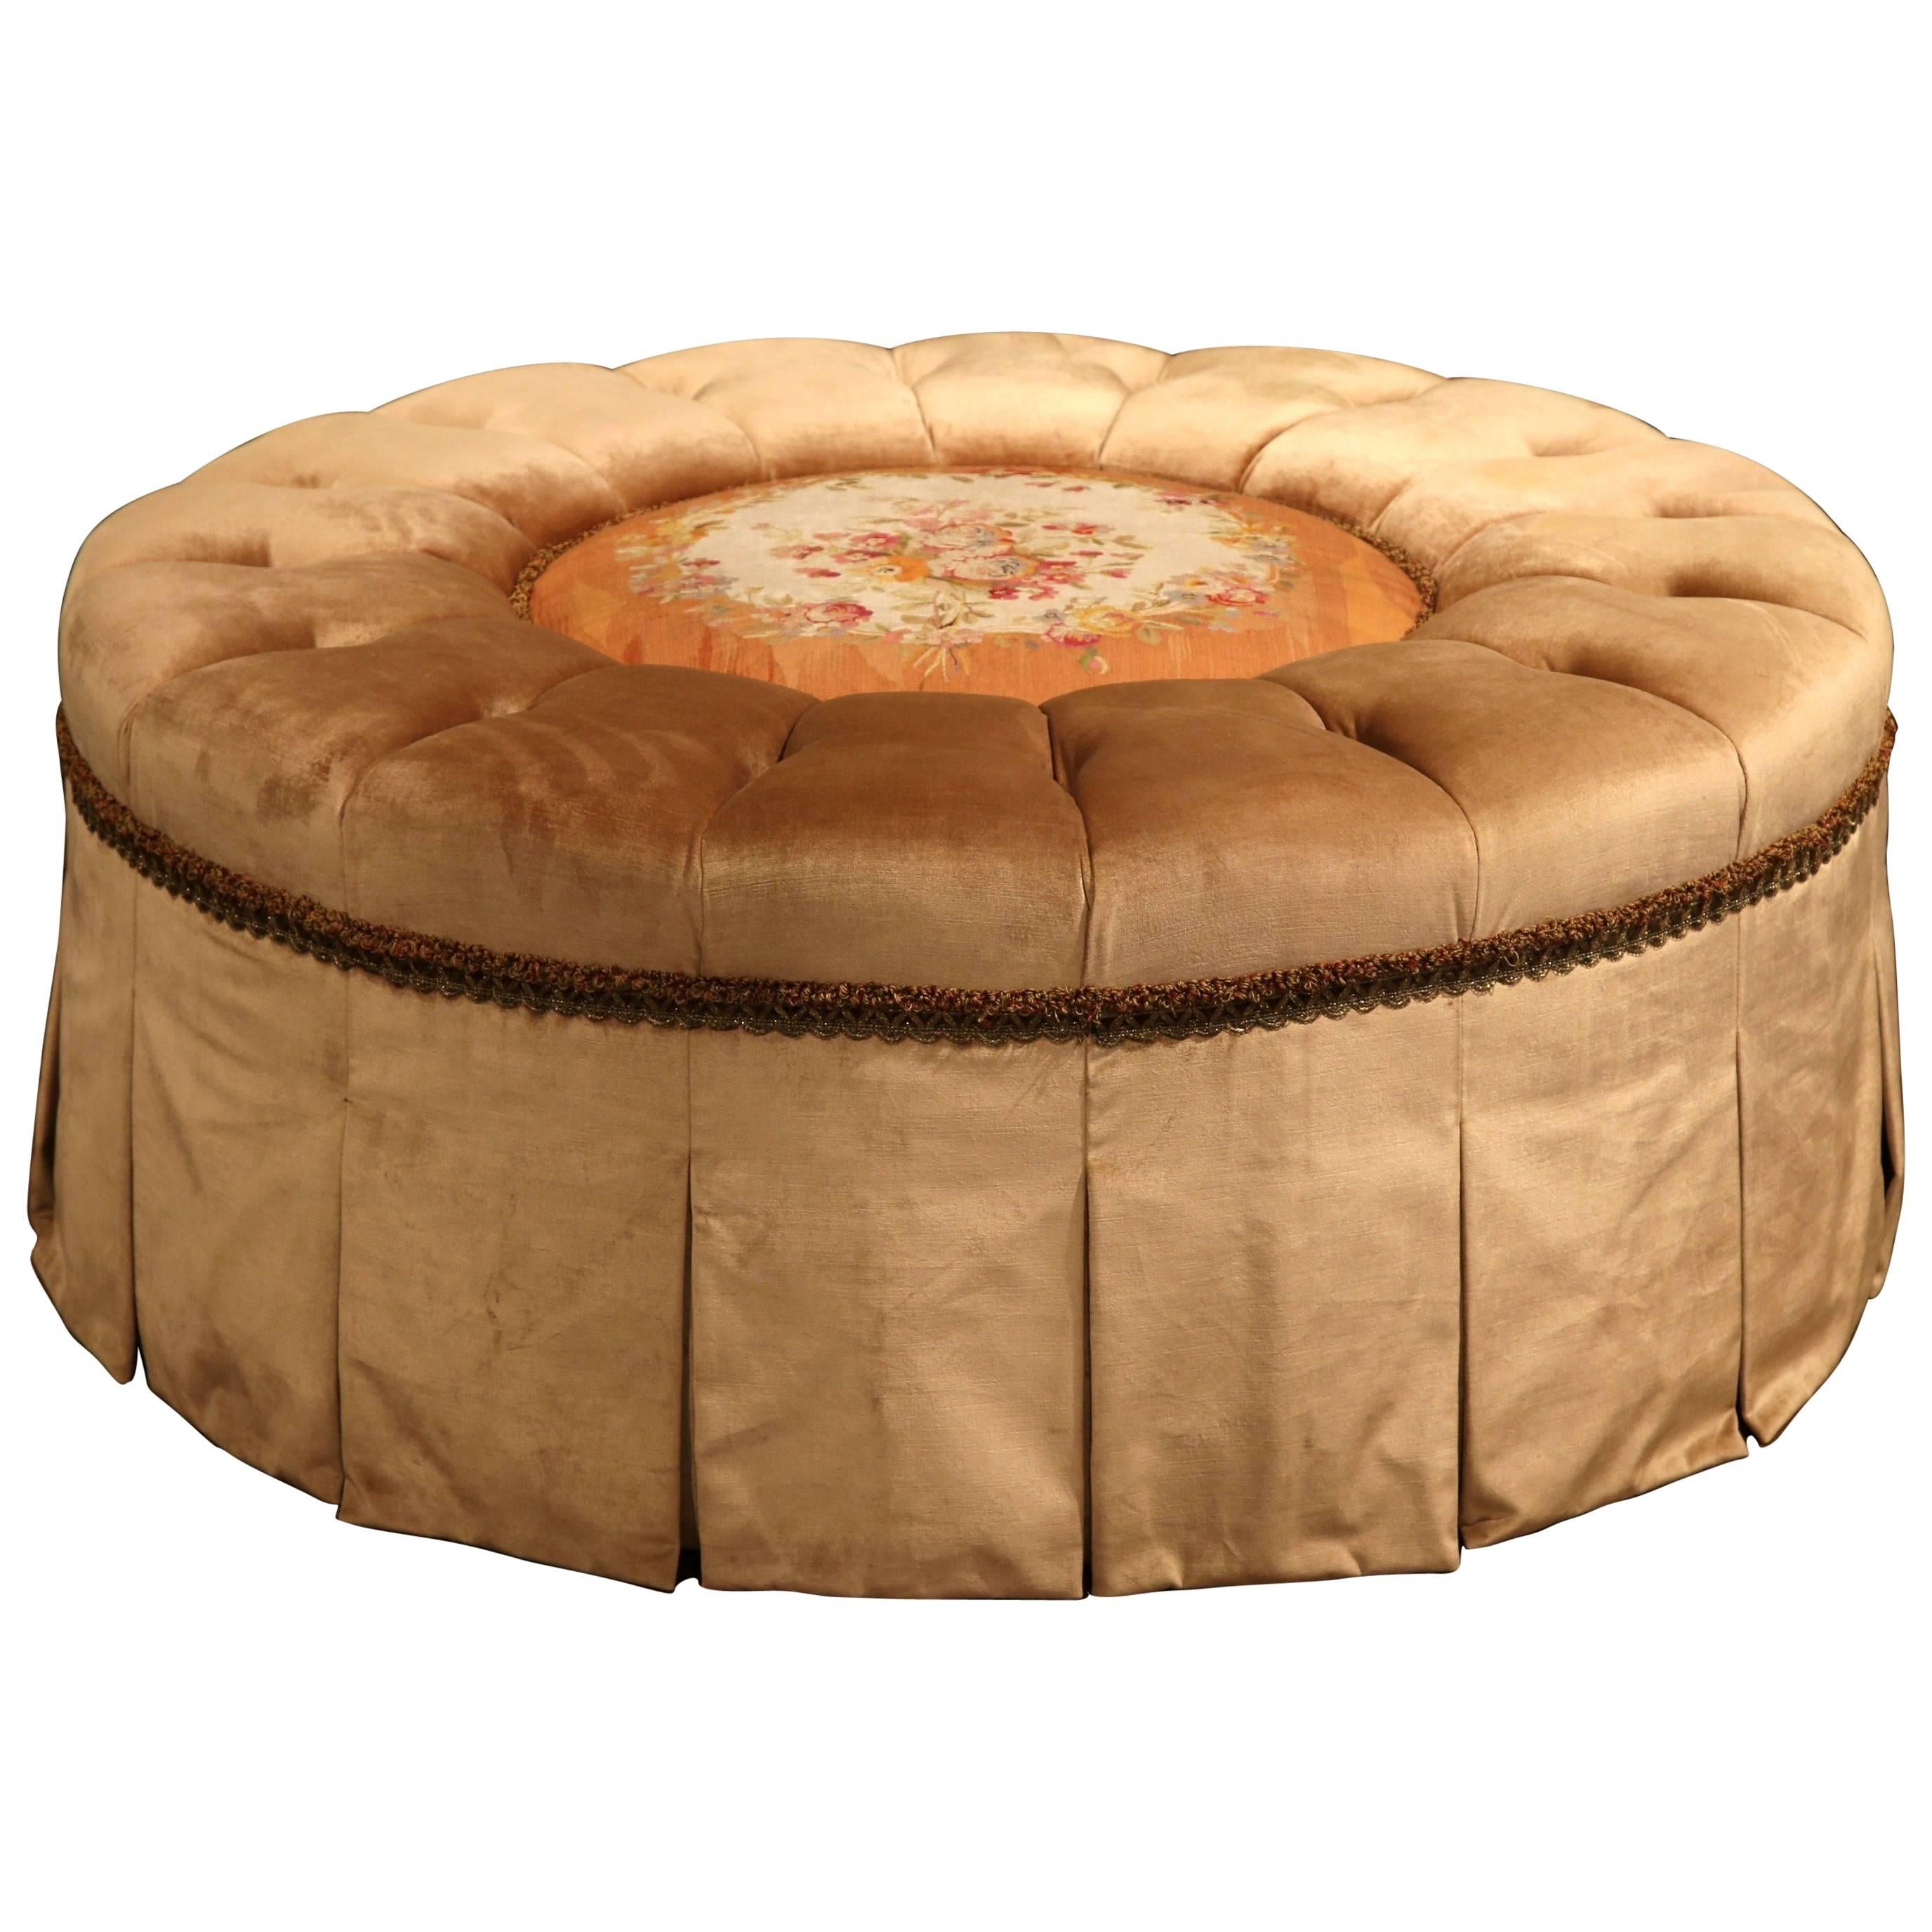 Large French Round Ottoman with 19th Century Centre Floral Aubusson Tapestry